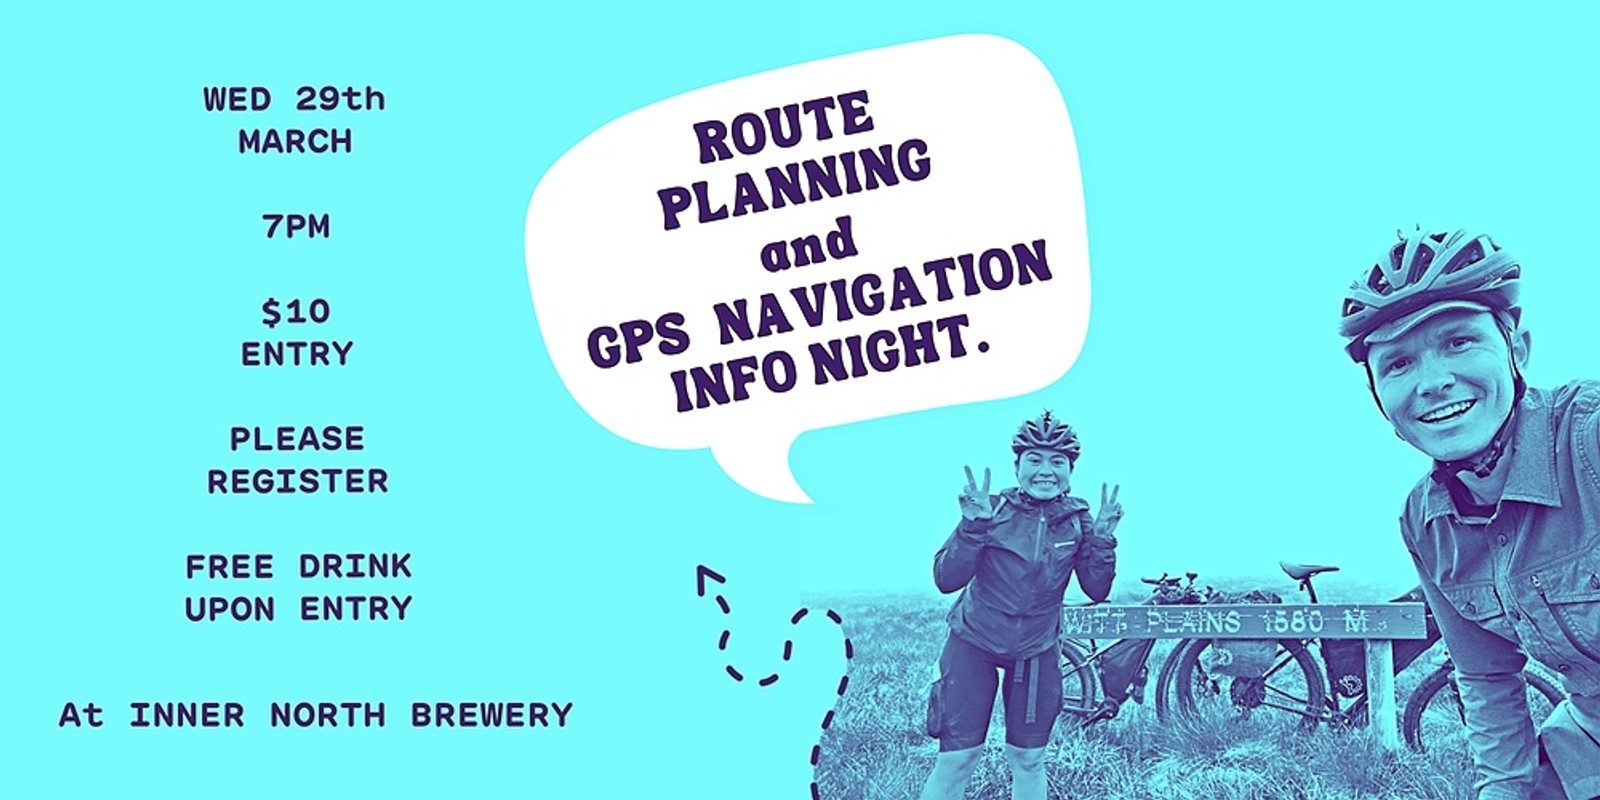 Route Planning and GPS Navigation Info night